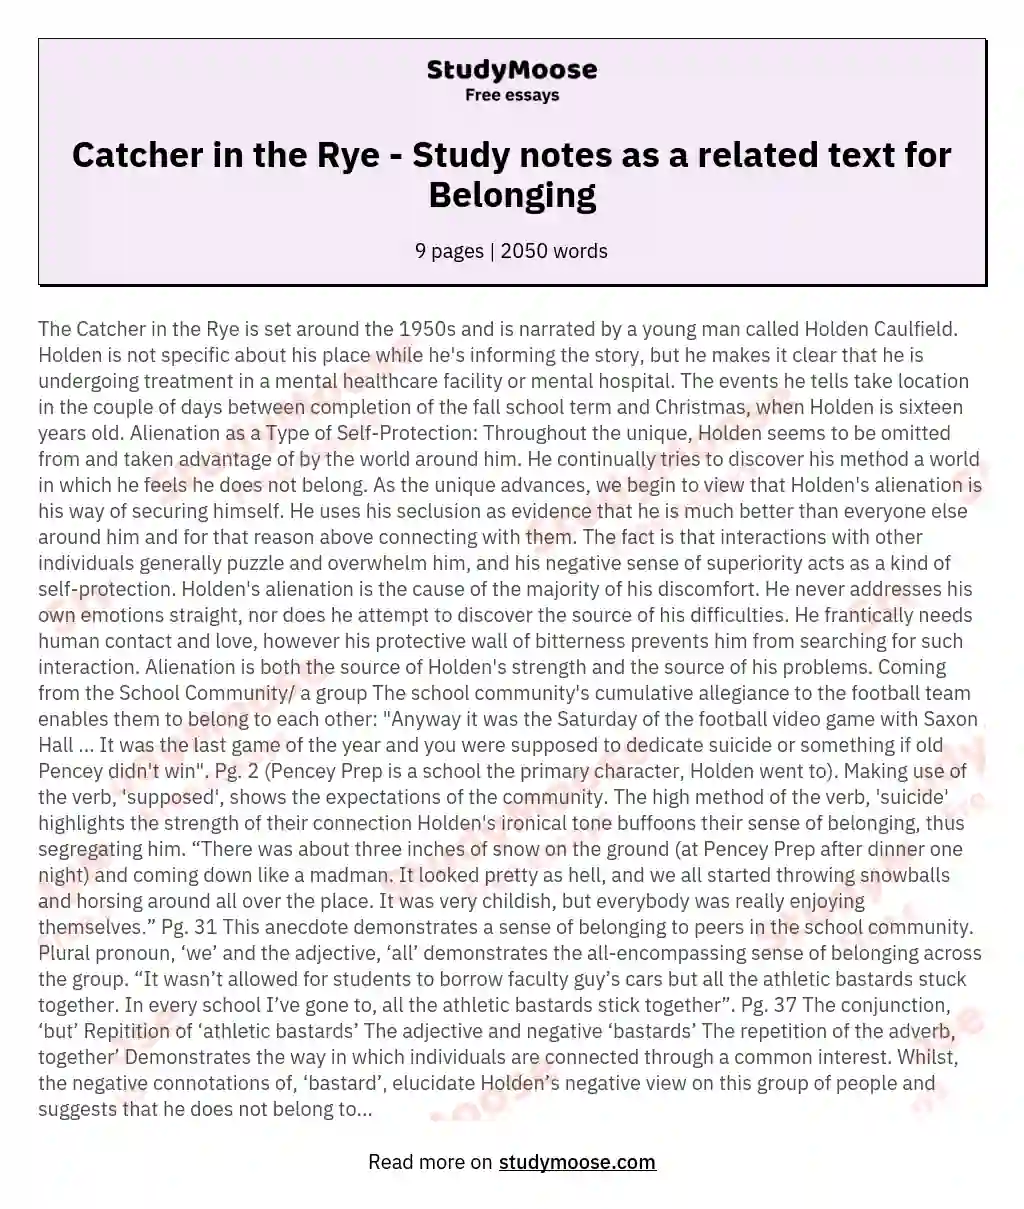 Catcher in the Rye - Study notes as a related text for Belonging essay